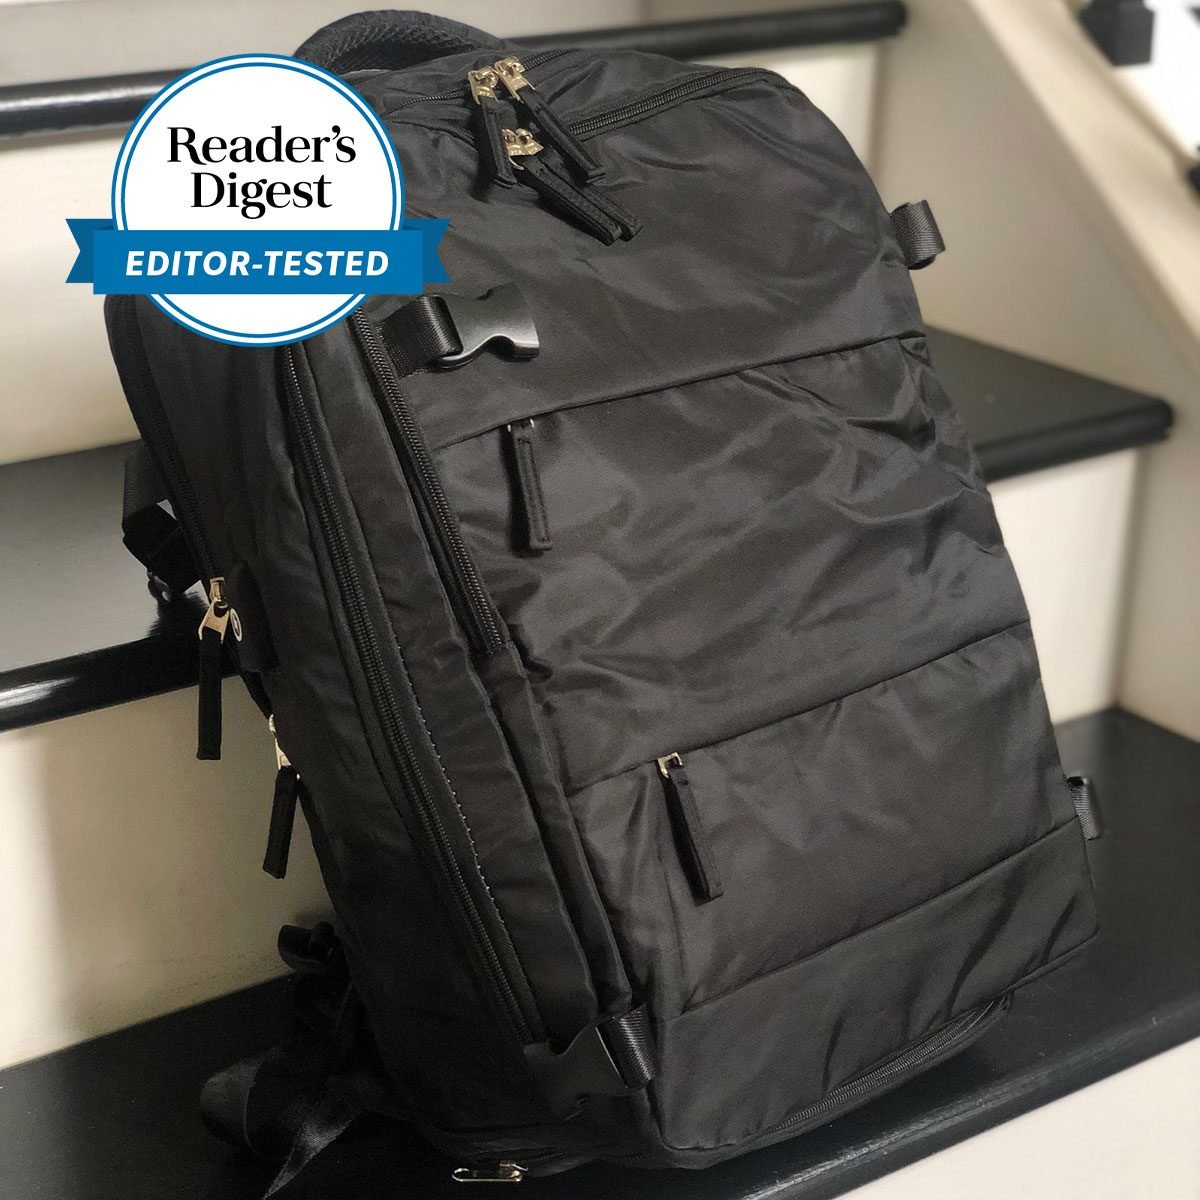 Theft Proof Bags for Travel: Do I Need One? • Her Packing List